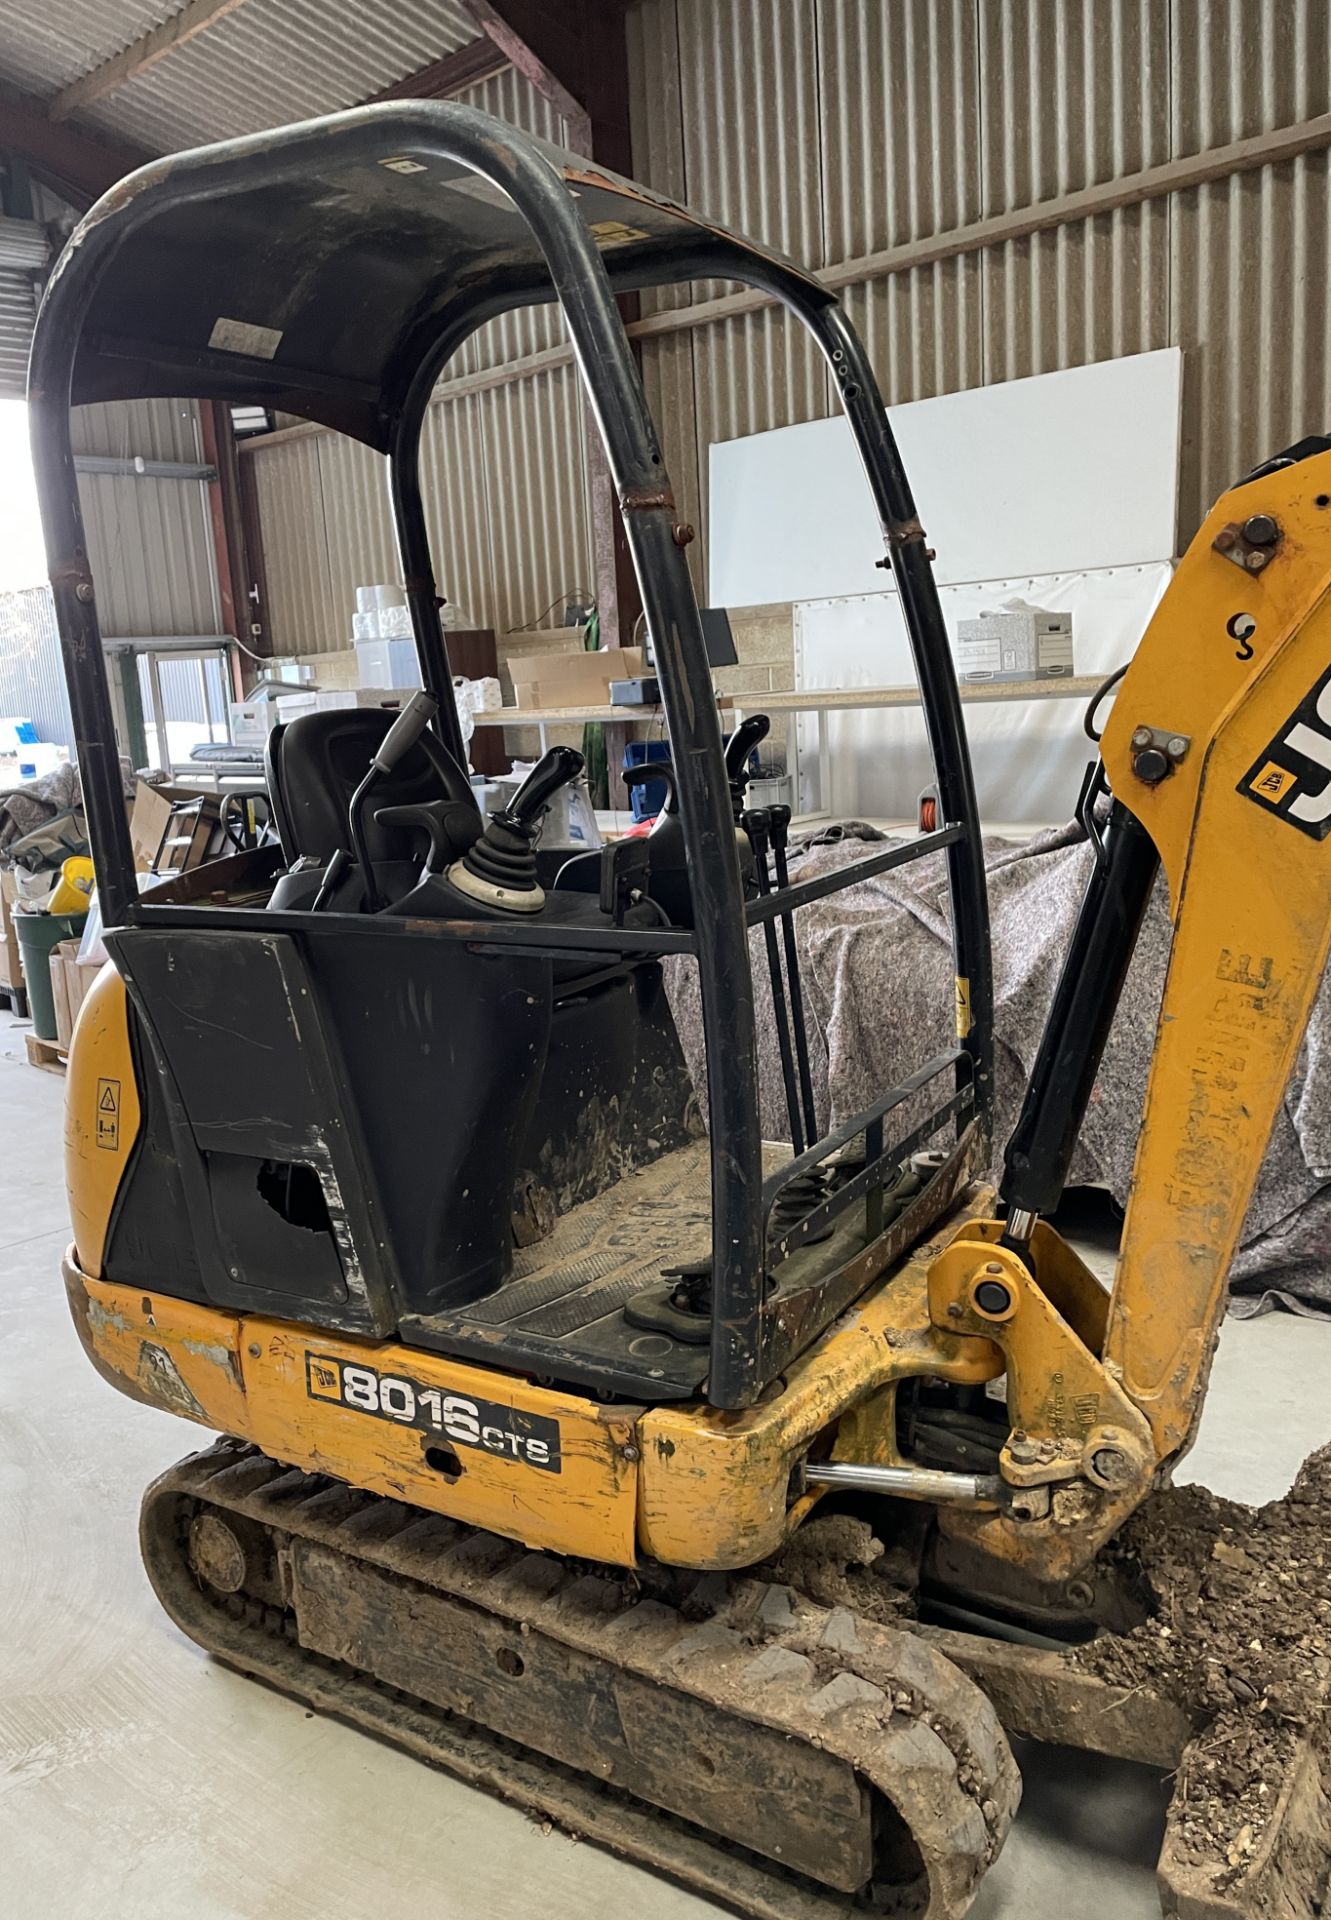 JCB 8016 CTS Compact Excavator (2013), Serial Number JCB08016E02071506, c.1885 Hours (Location: